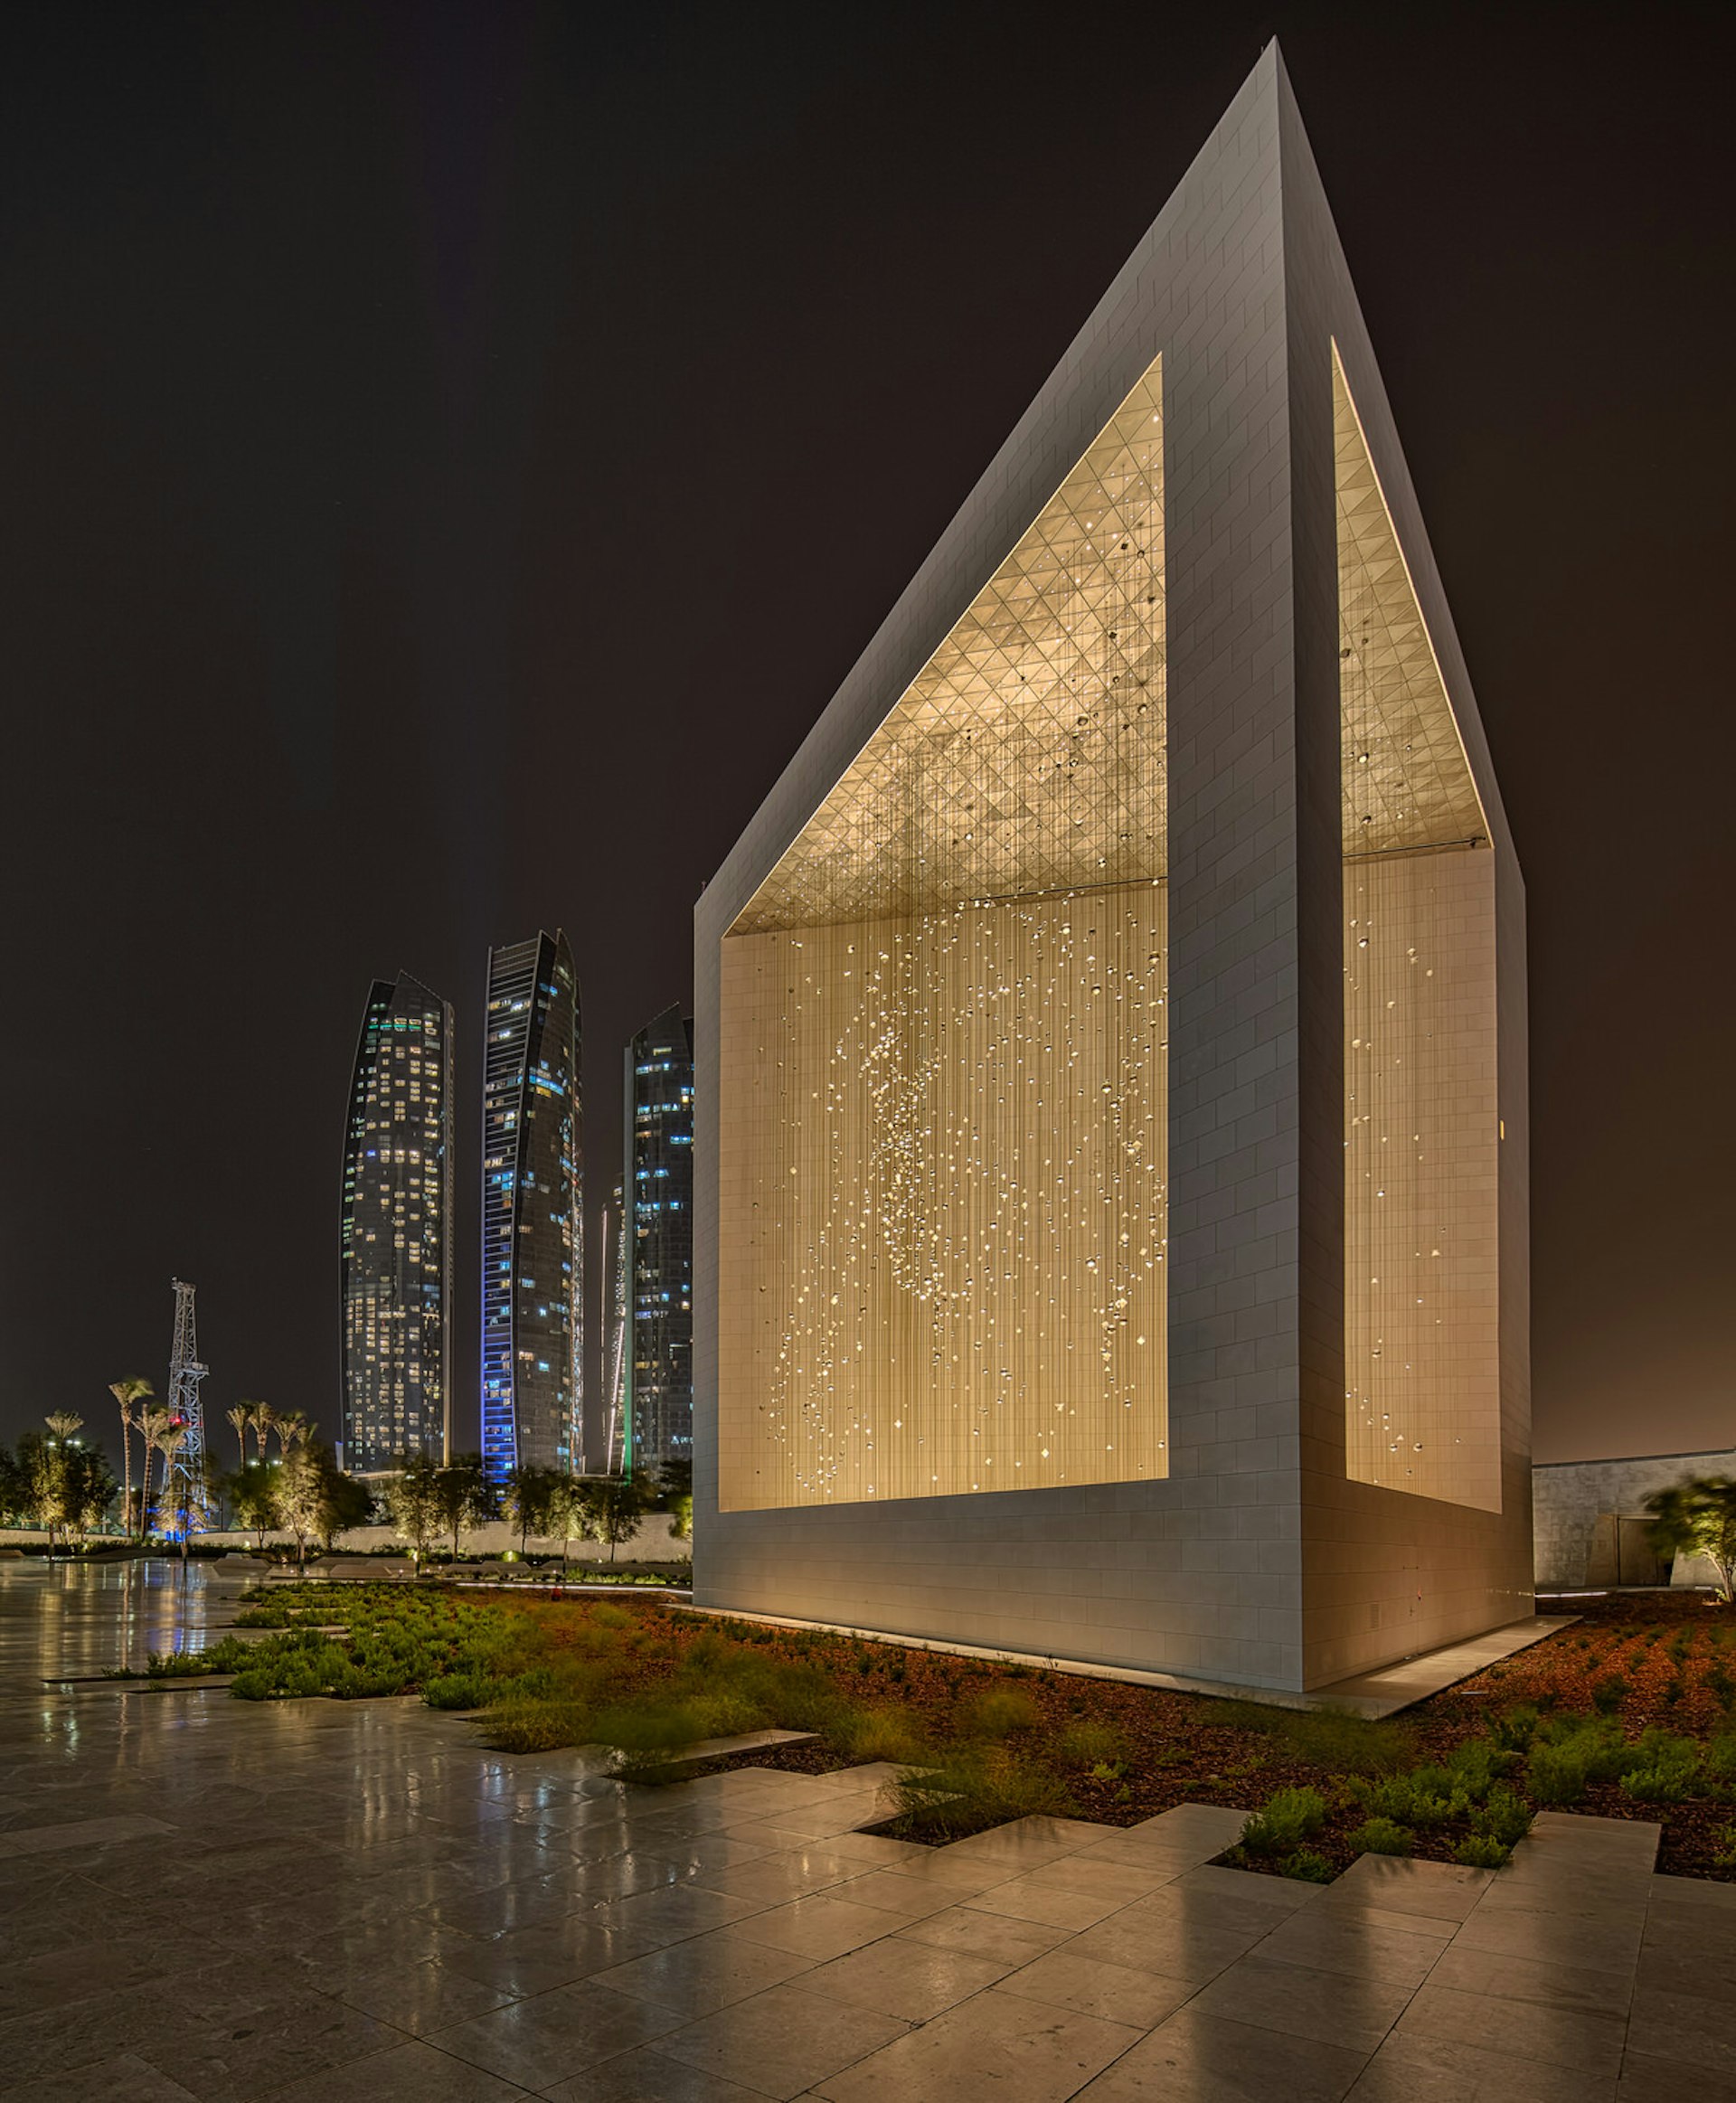 The iconic Founder's Memorial is lit up in front of a row of skyscrapers in Abu Dhabi, United Arab Emirates